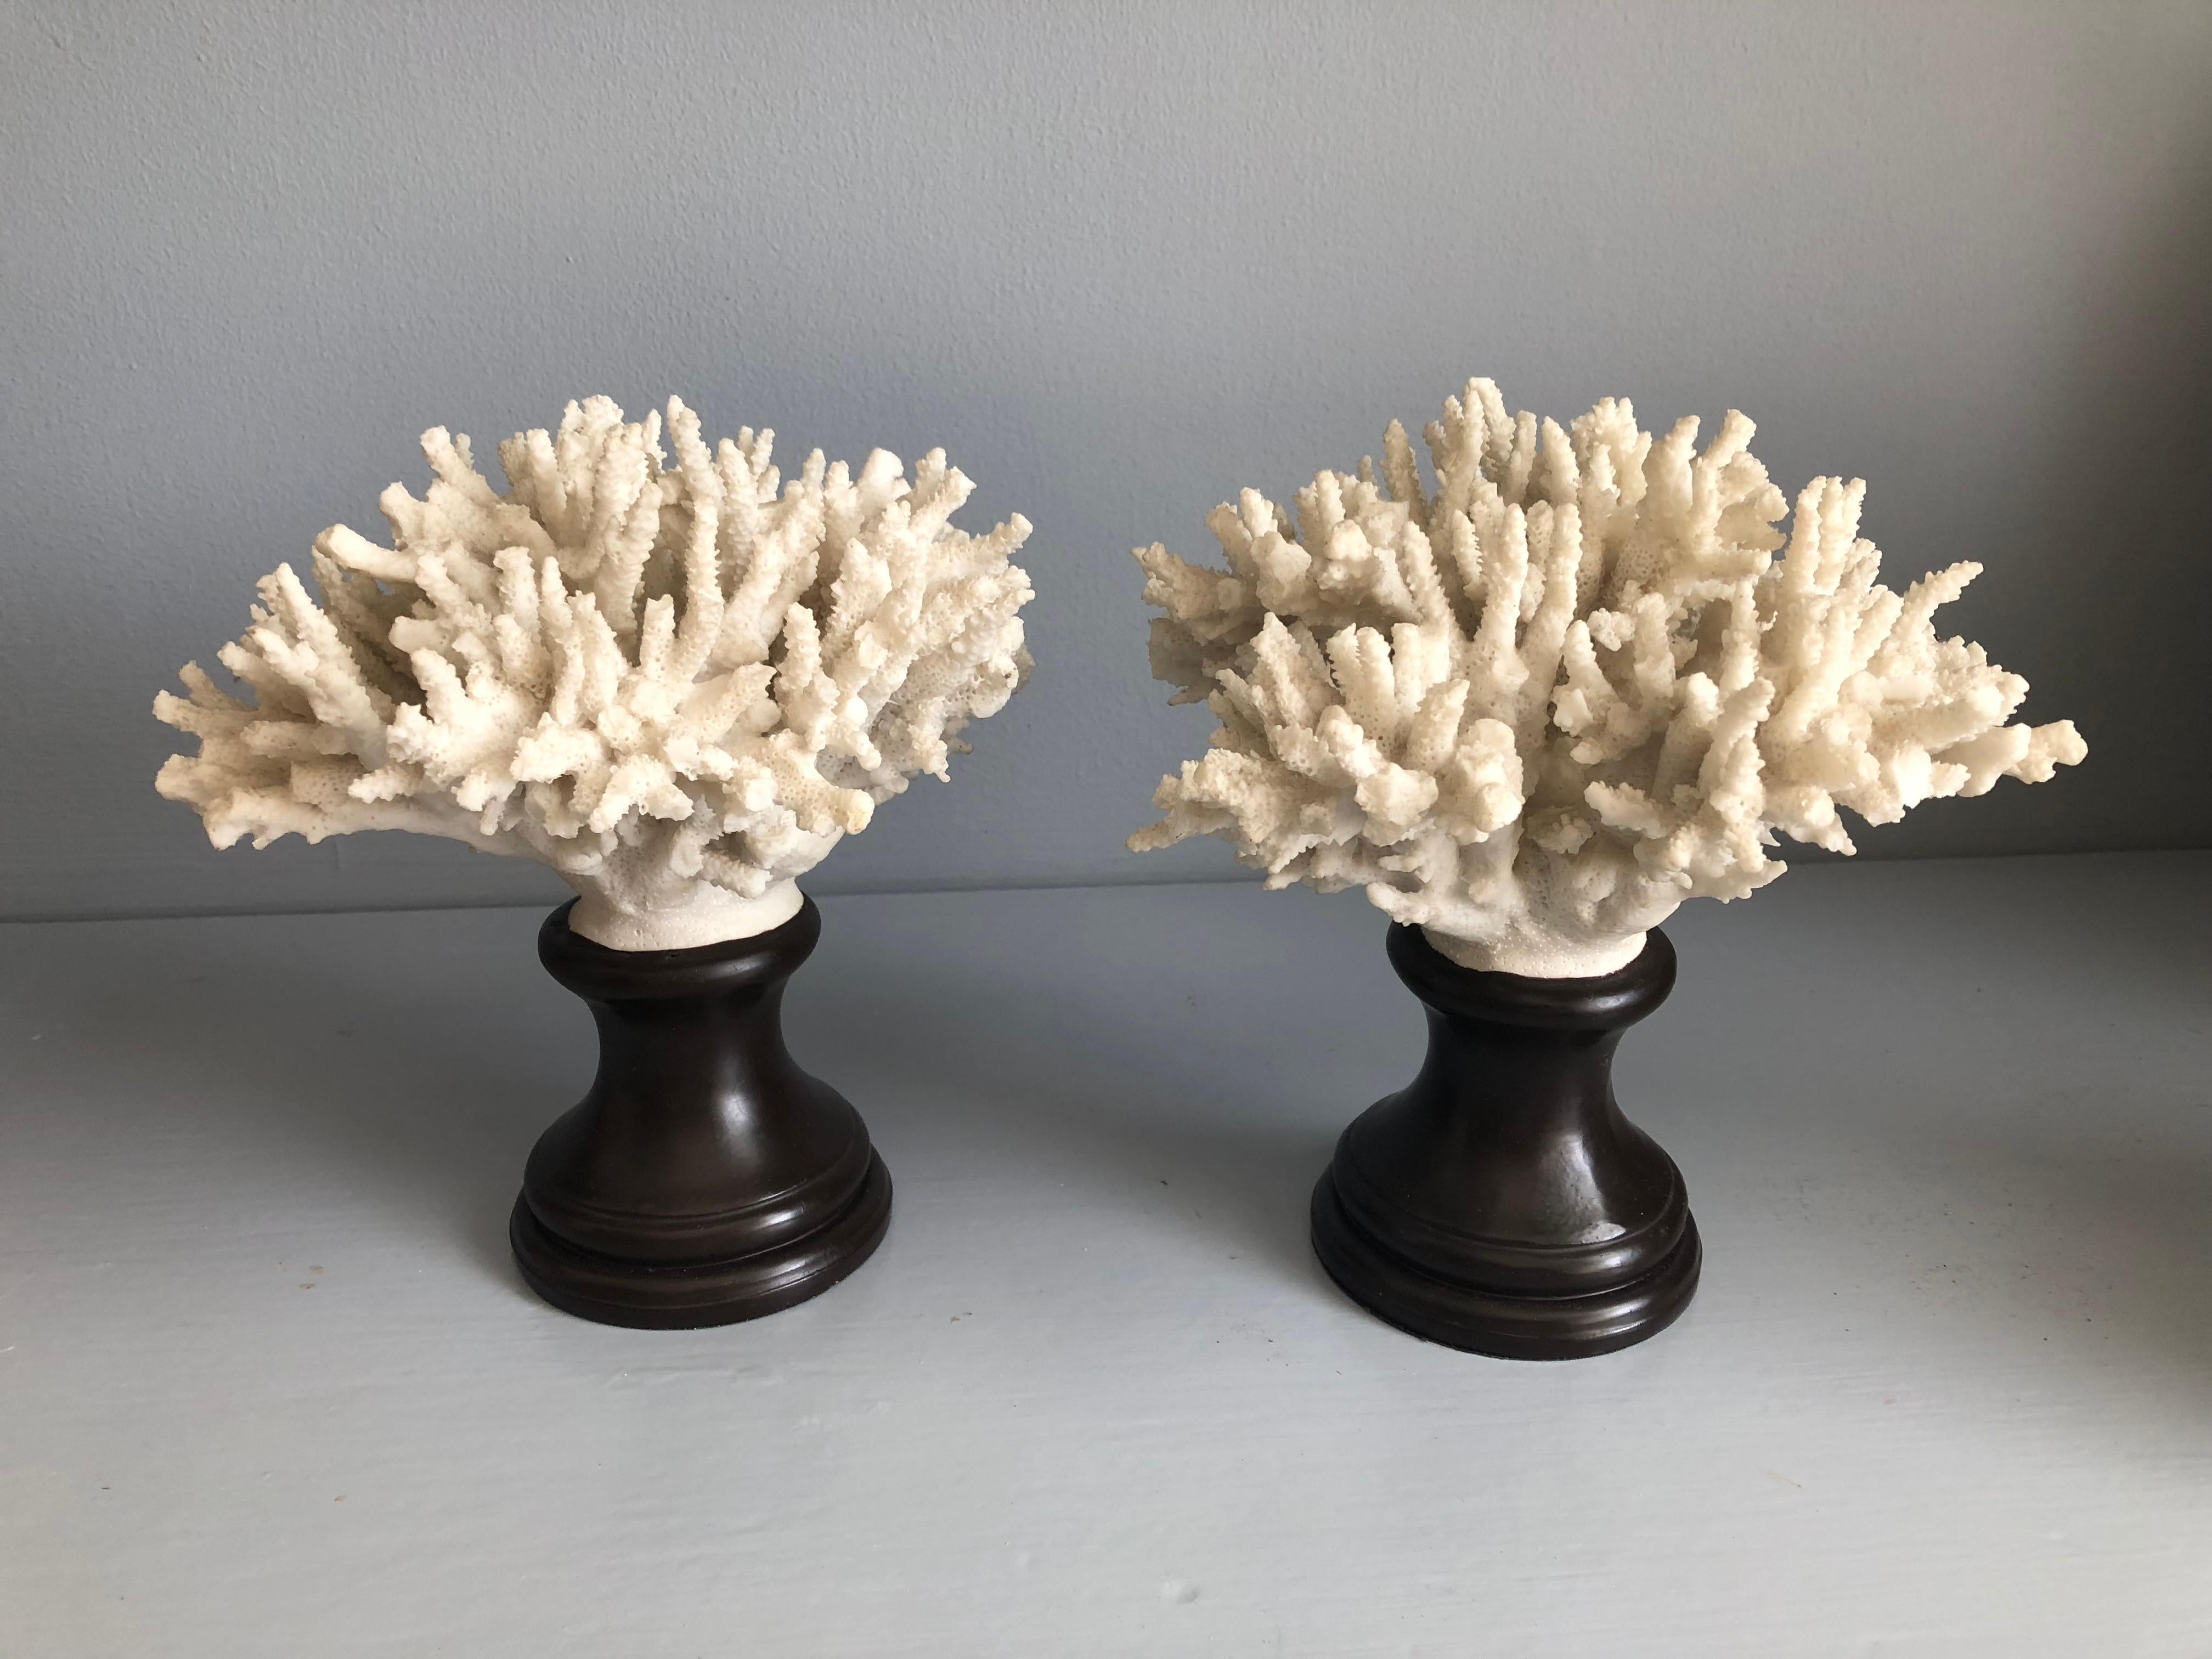 A pair of faux coral specimens in fired china mounted on ceramic stands.